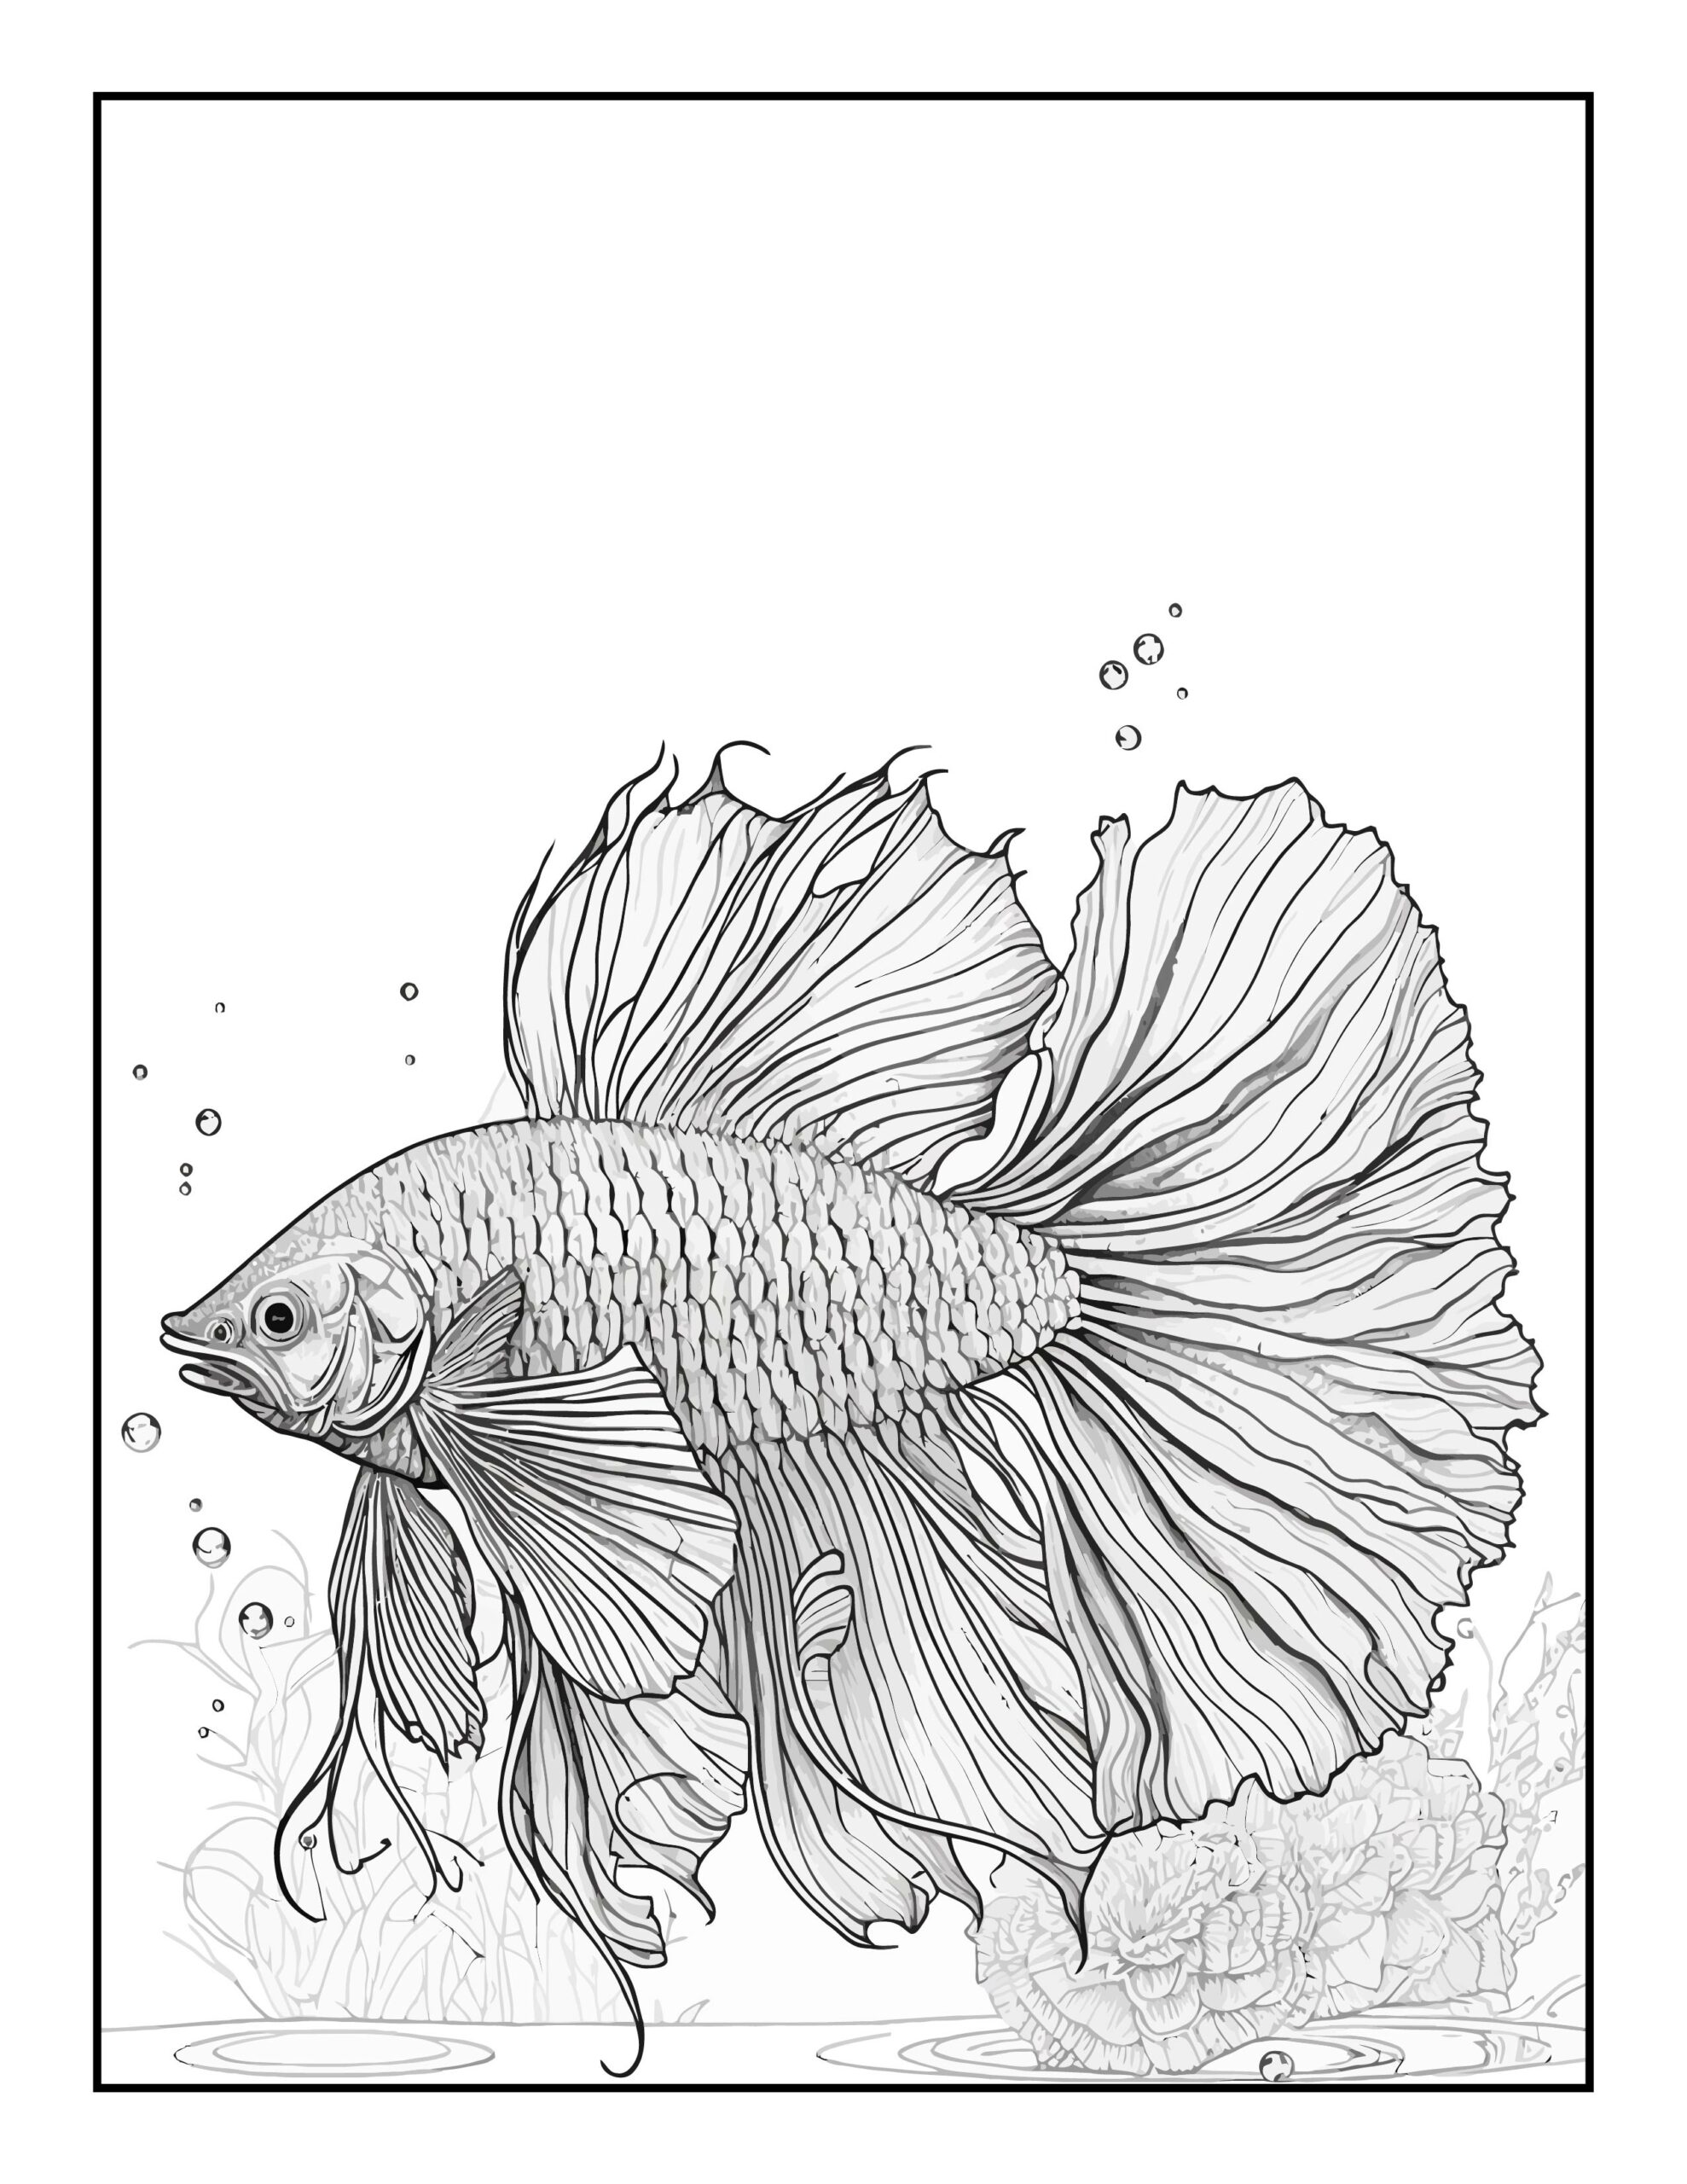 Make a splash with the aquarium fish coloring book pages of underwater fun made by teachers